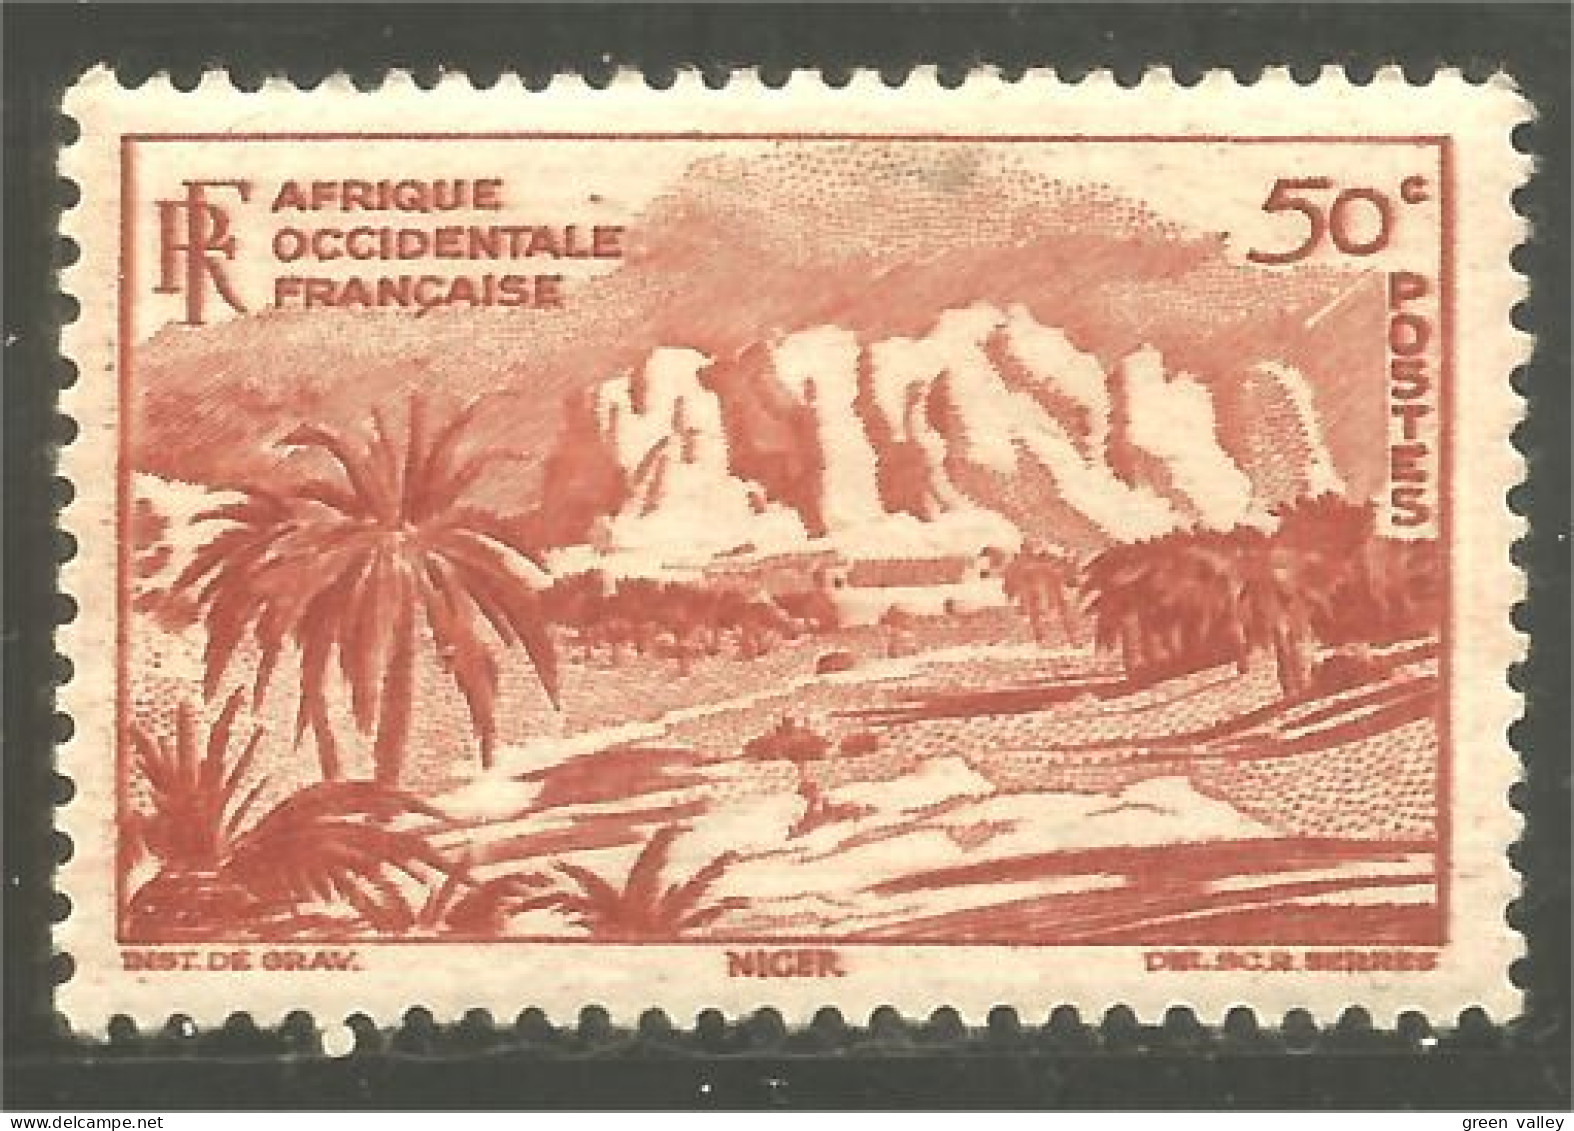 372 AOF Montagnes Niger Mountains MH * Neuf (f3-AEF-387) - Nuevos